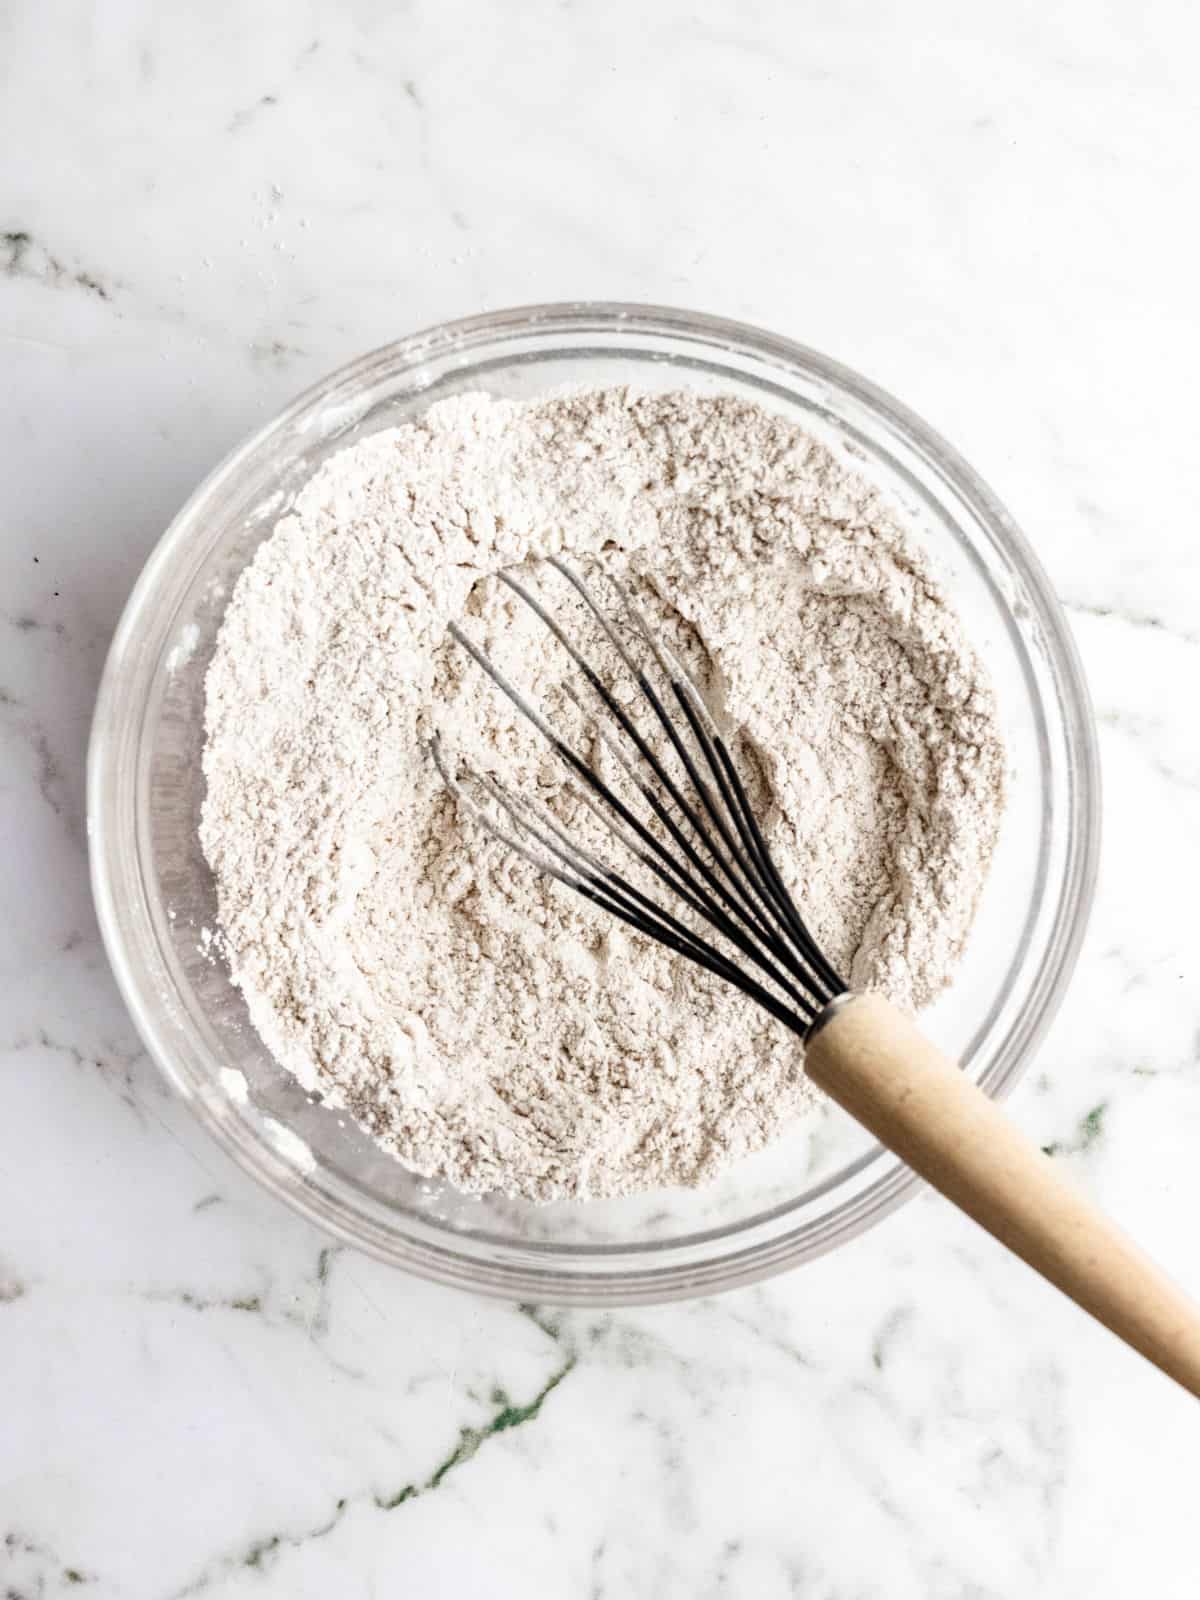 Dry ingredients for muffins in a glass bowl with a whisk on a white marble surface.